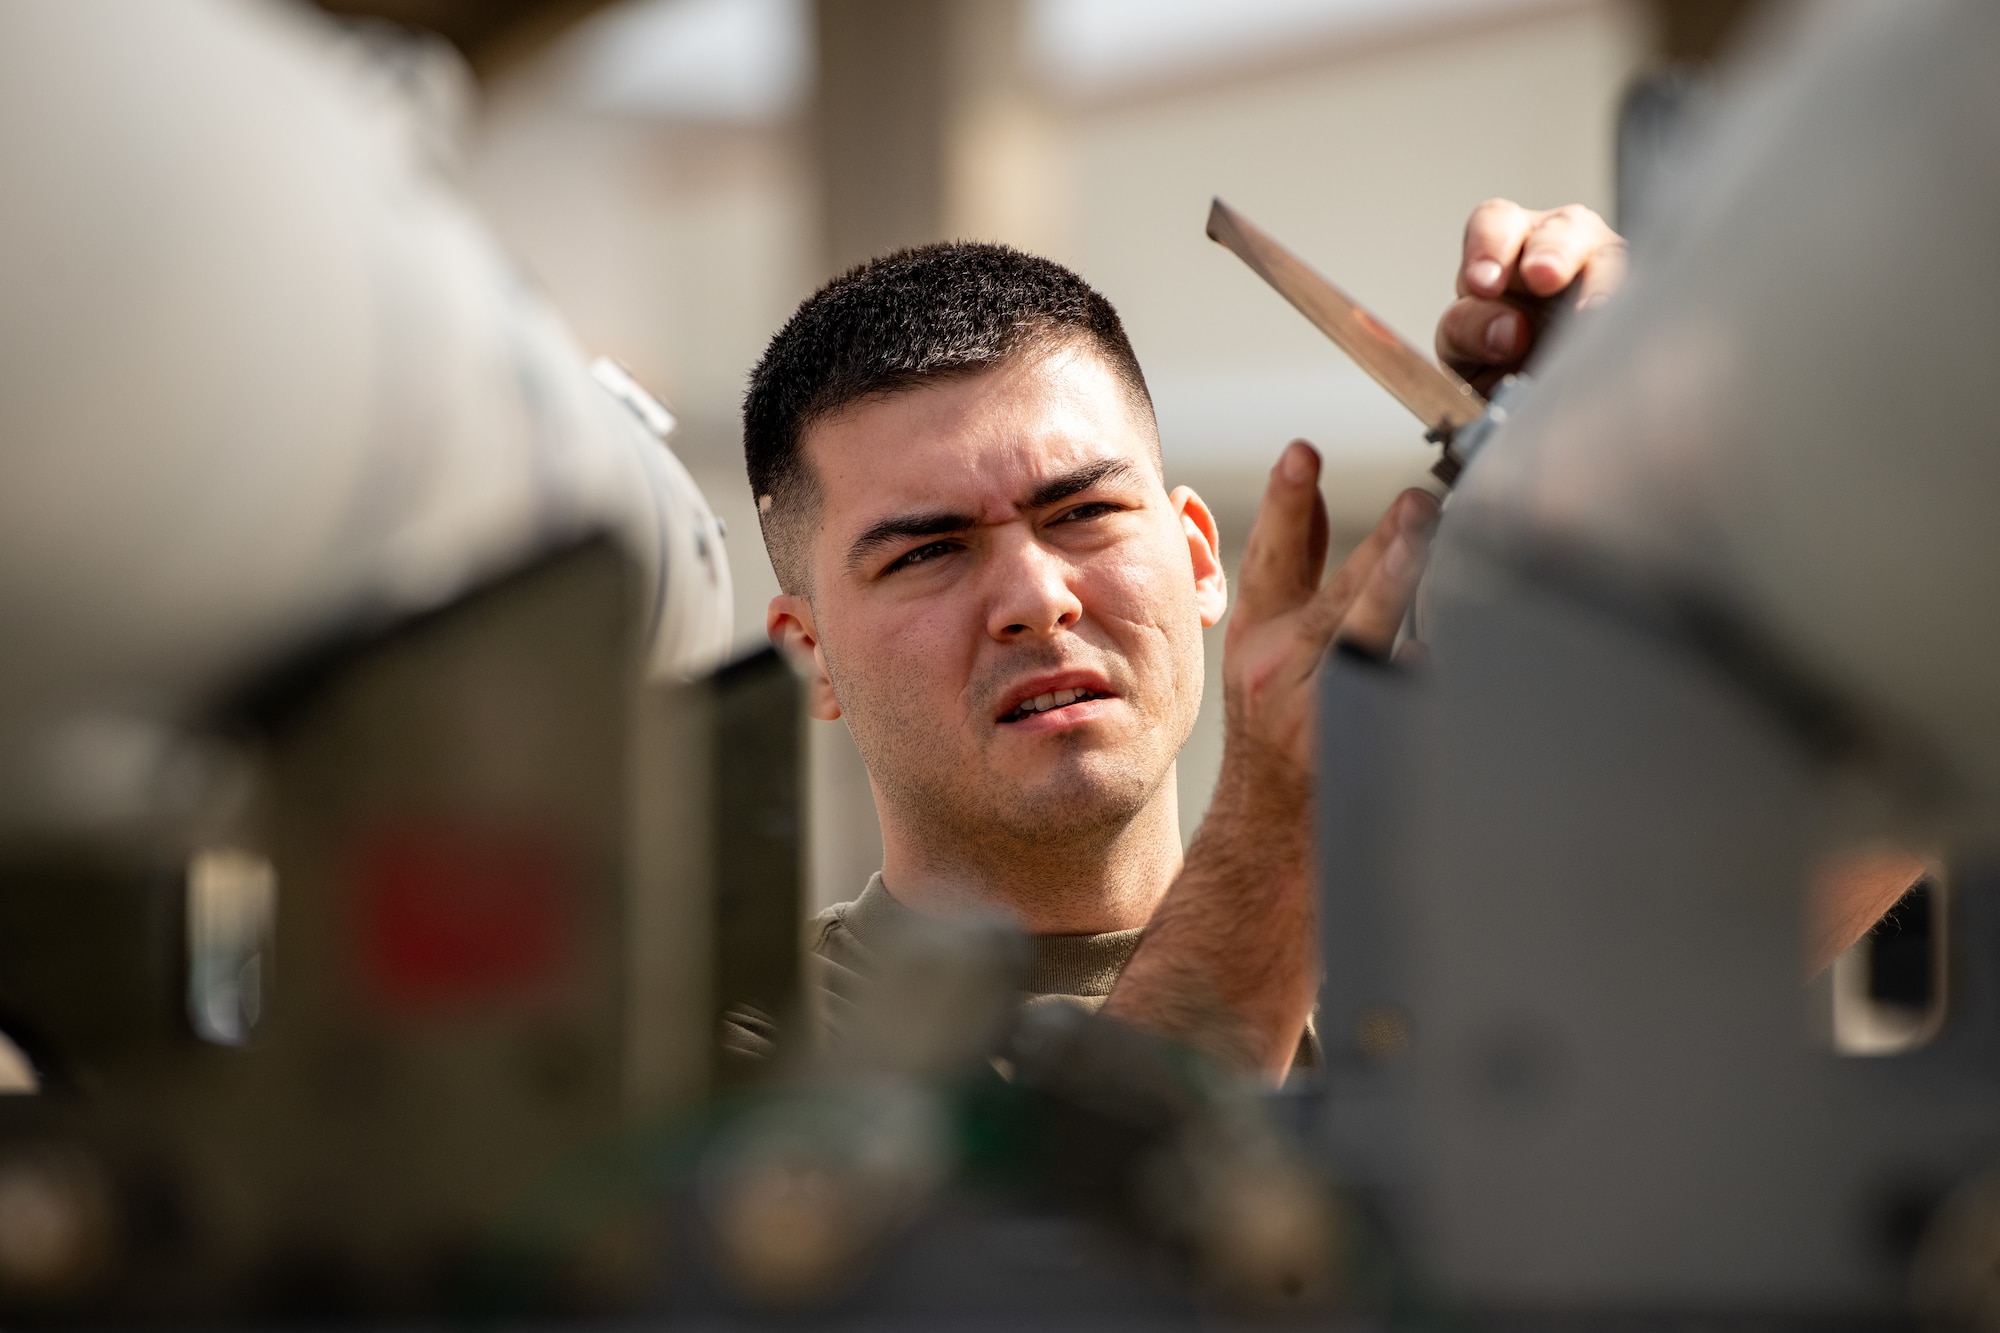 An Airman from the 18th Aircraft Maintenance Squadron prepares an AIM-120 Advanced Medium Range Air-to-Air Missile to be loaded onto an F-15C Eagle during a weapons load competition at Kadena Air Base, Japan, Nov. 17, 2023. Kadena’s aircraft weapons load teams face off quarterly to test the skill and professionalism of Kadena Airmen while building camaraderie among the base’s diverse team of aircraft maintainers. (U.S. Air Force Photo by Lt. Col. Raymond Geoffroy)